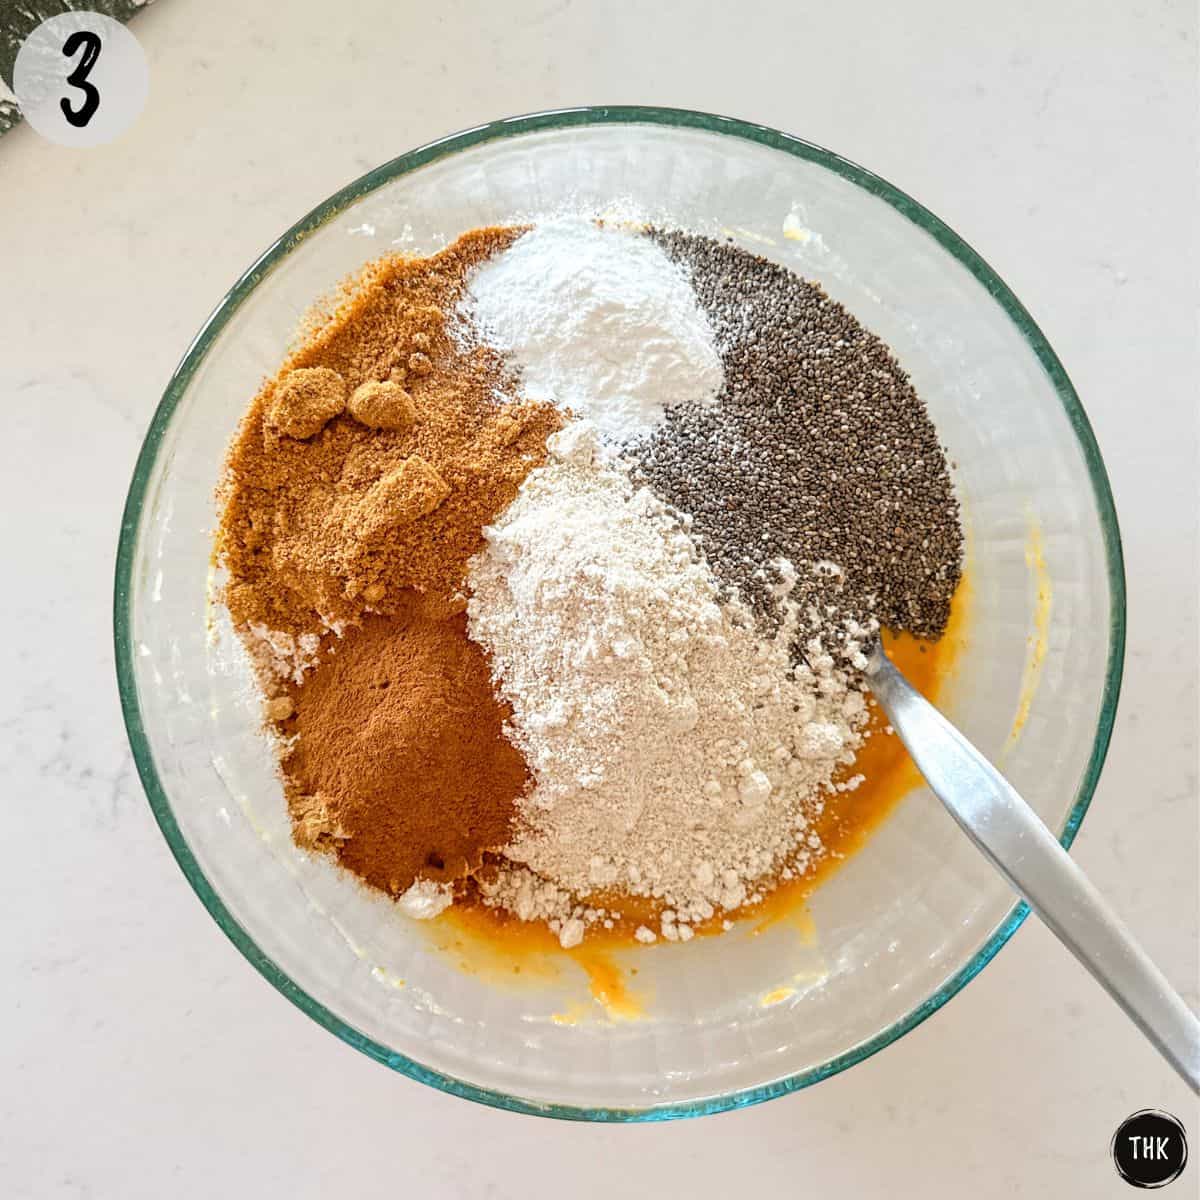 Orange batter with flour, chia seeds, spices and sugar on top in large bowl.